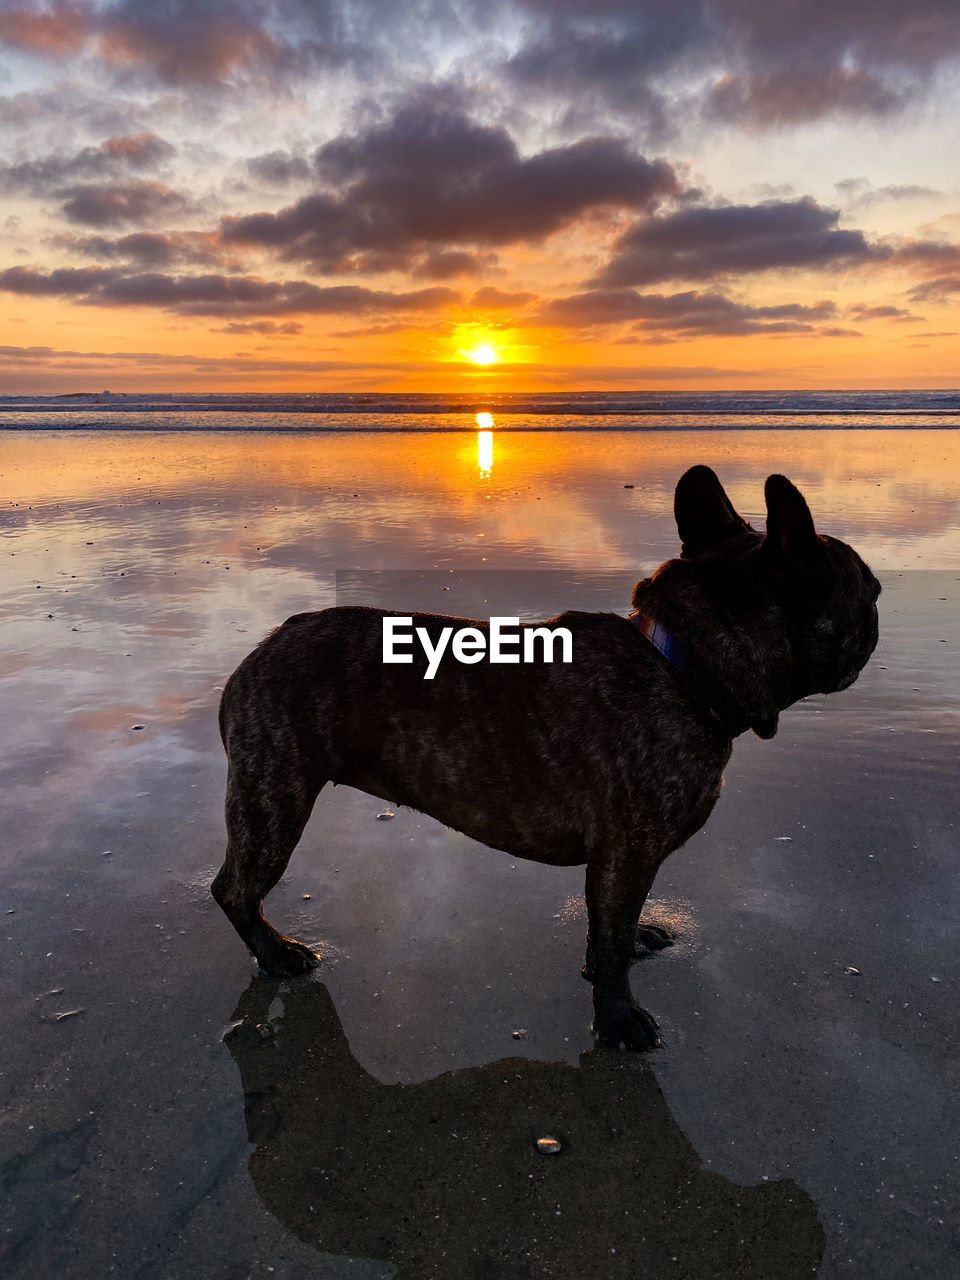 VIEW OF DOG ON BEACH AGAINST SUNSET SKY